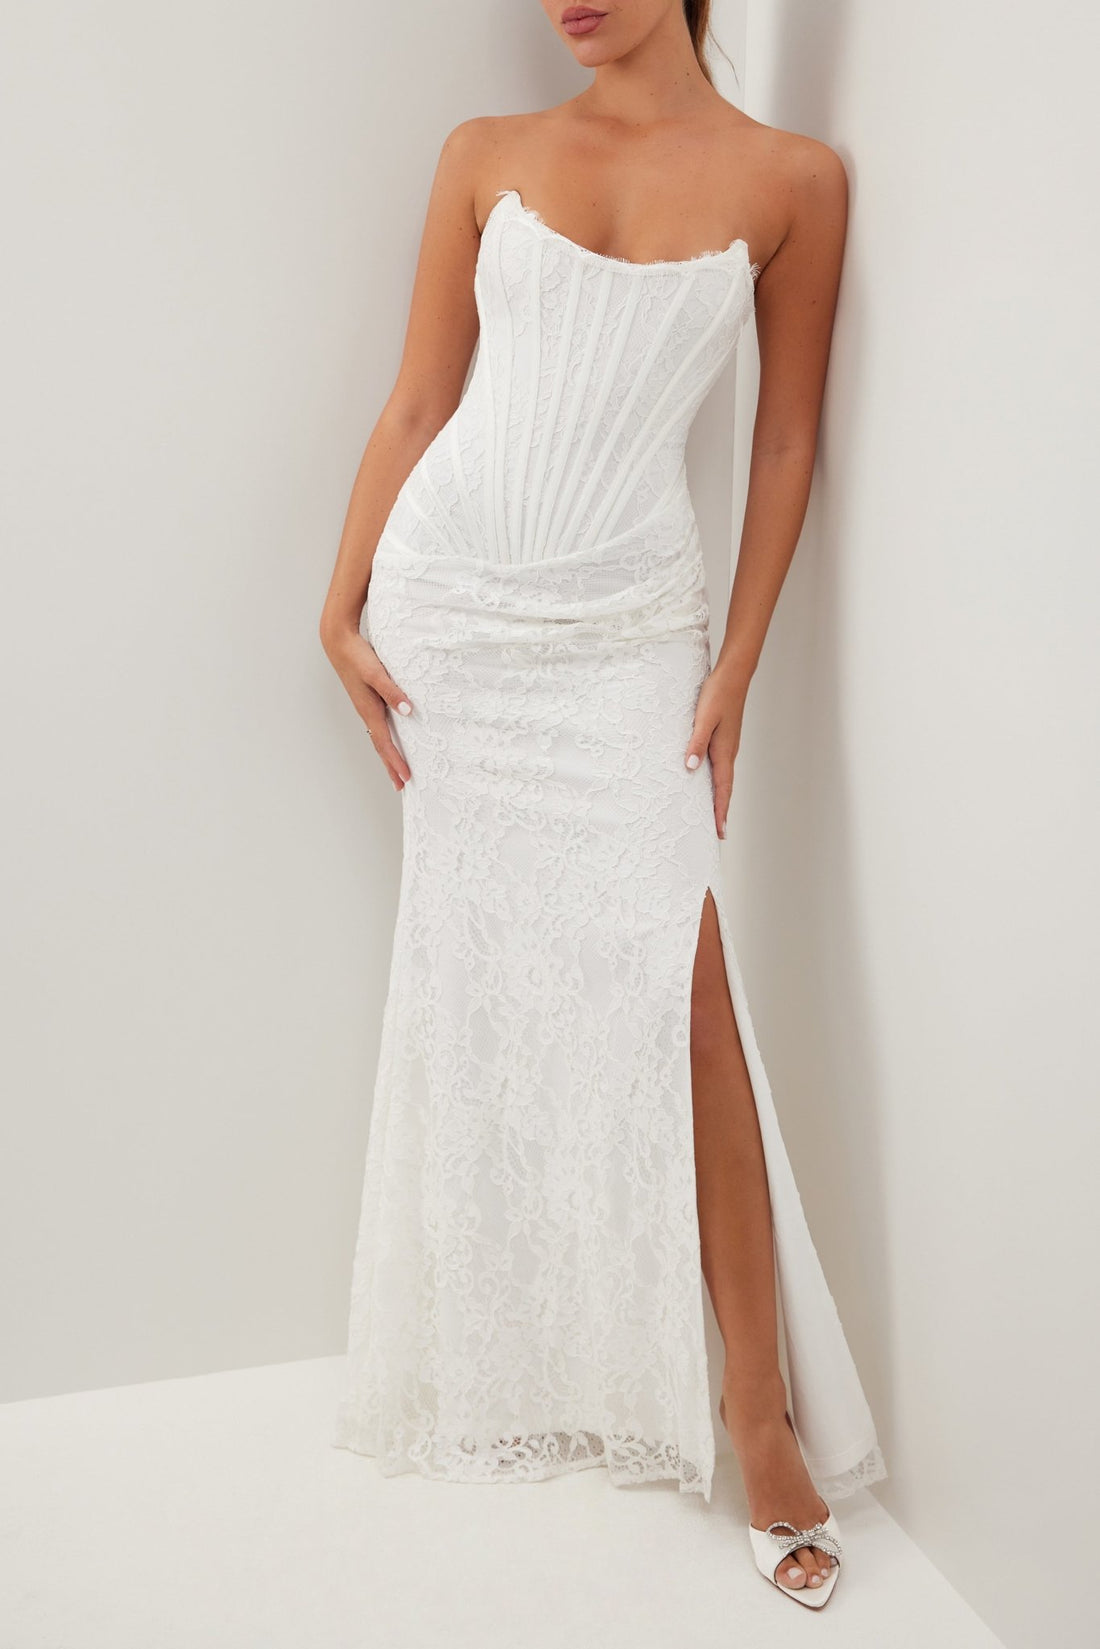 White strapless lace corset maxi dress - HEIRESS BEVERLY HILLS